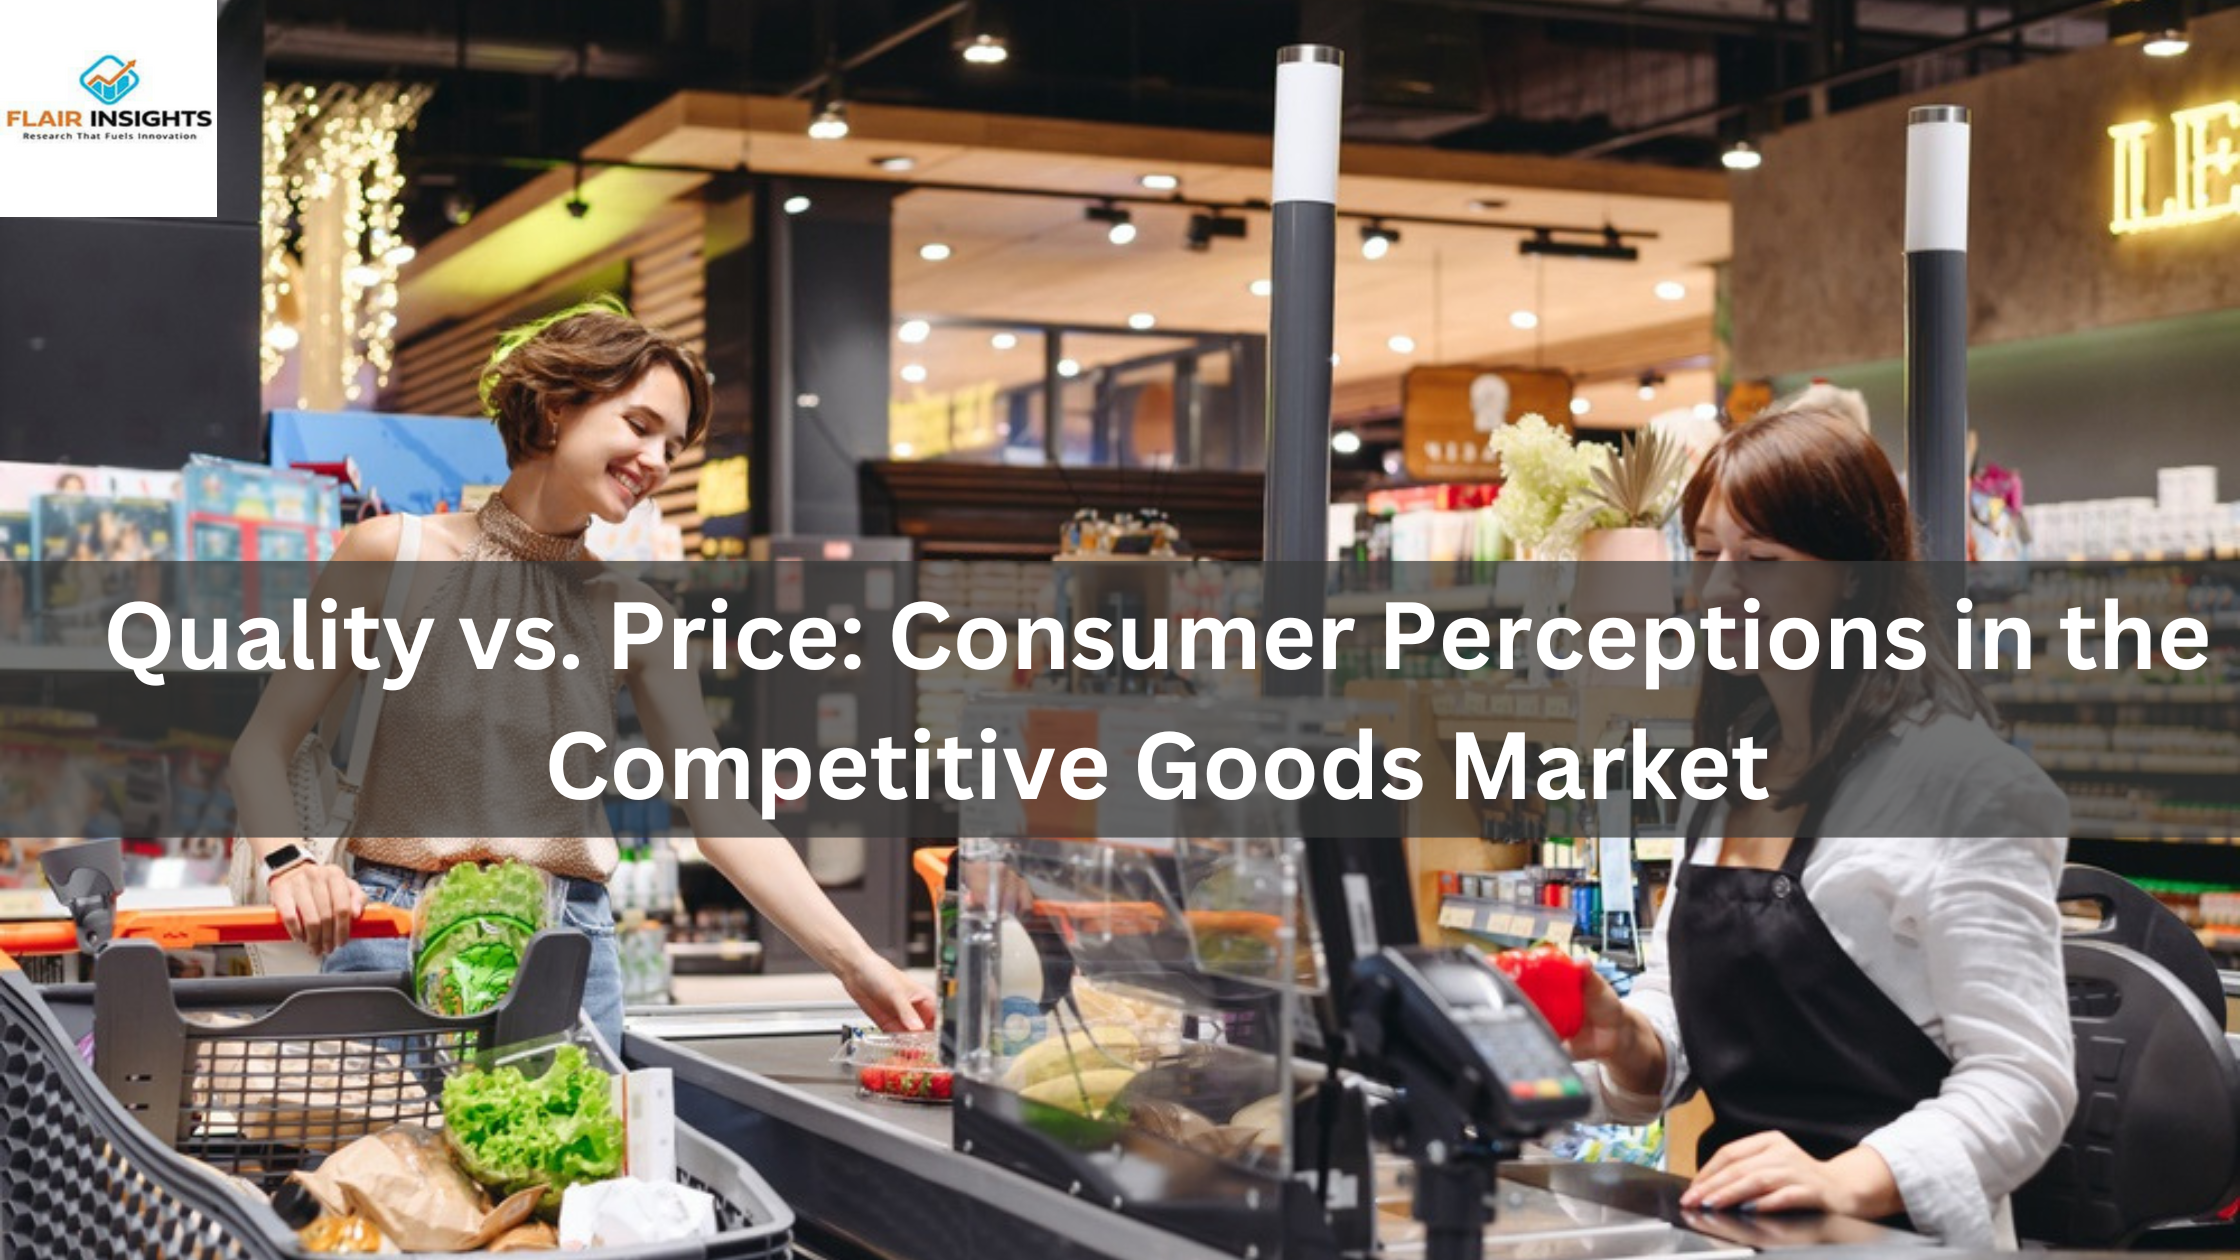 Quality vs. Price: Consumer Perceptions in the Competitive Goods Market